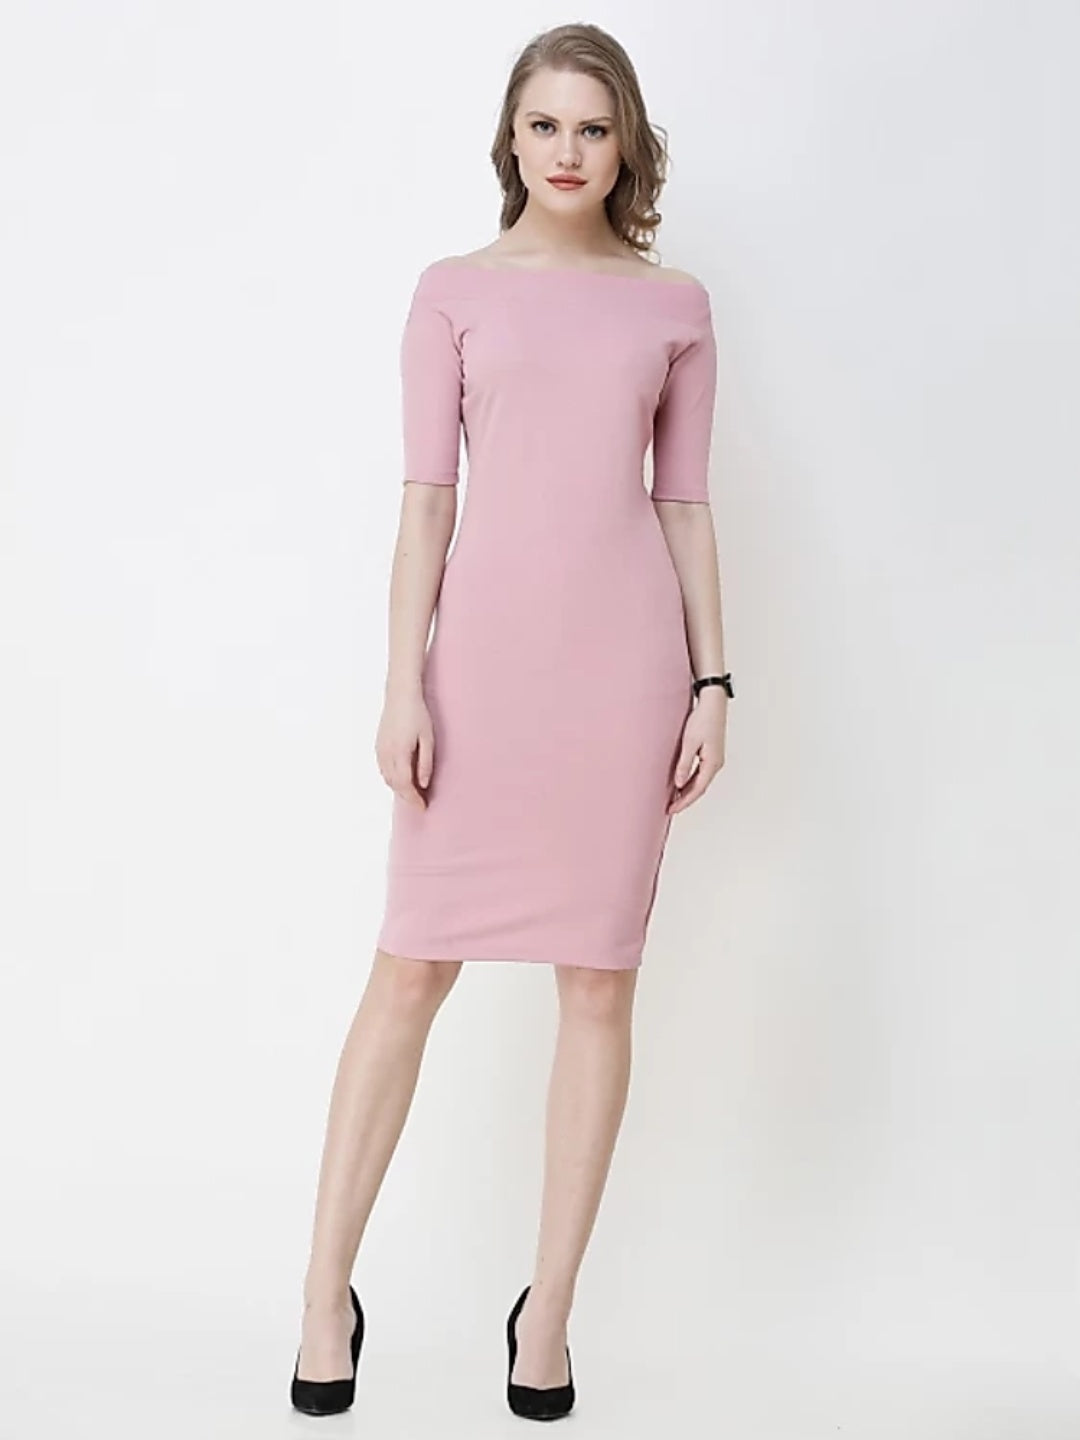 Baby Pink Bodycon Dress